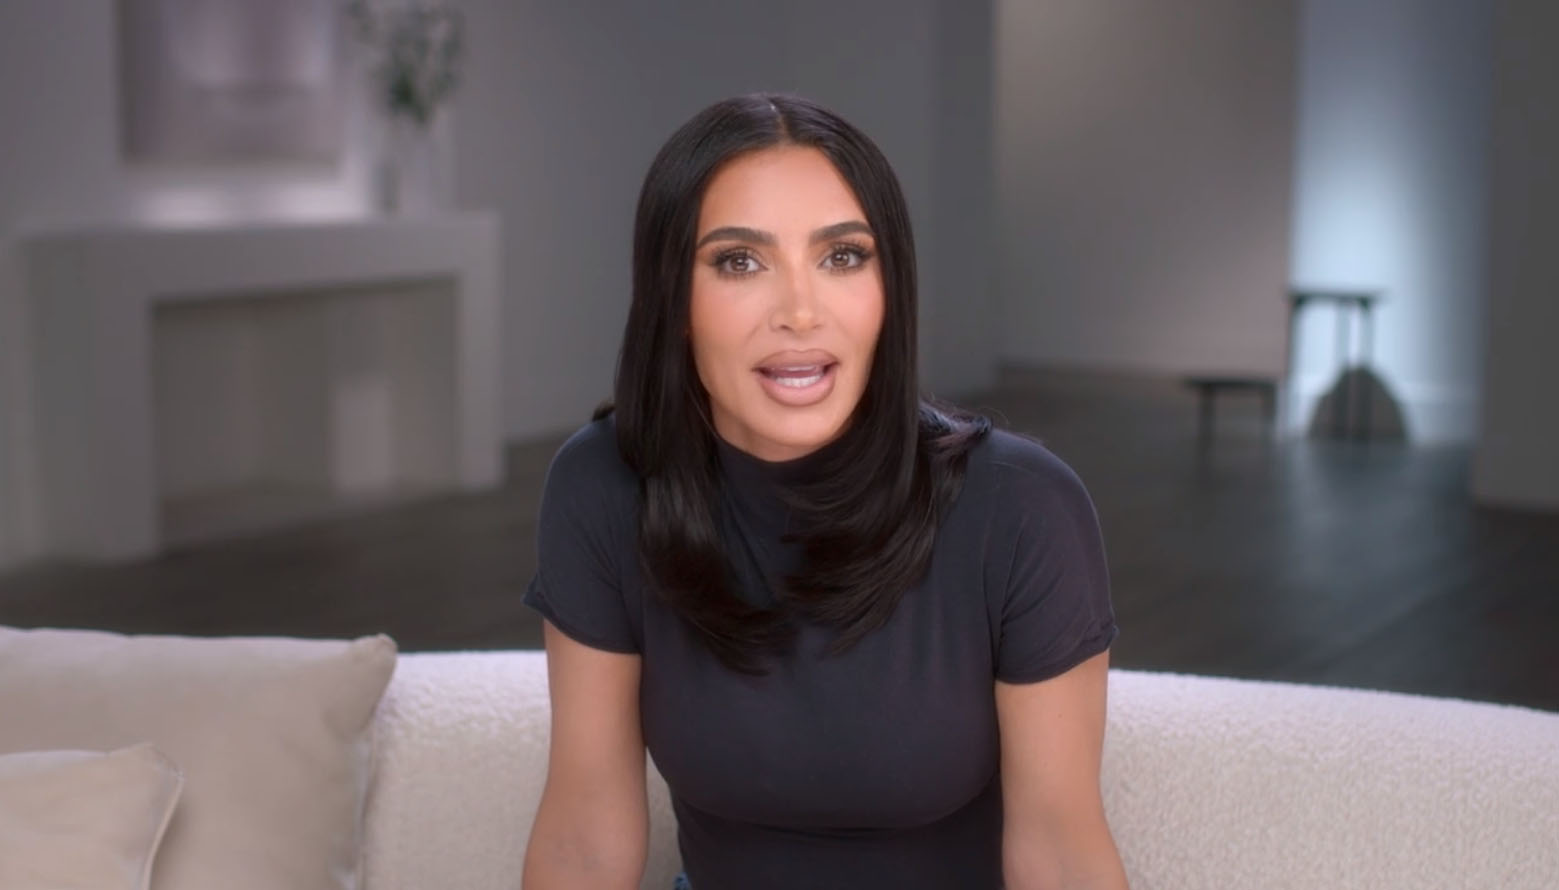 Kim slammed the 'hater' for not including her in the video with her family